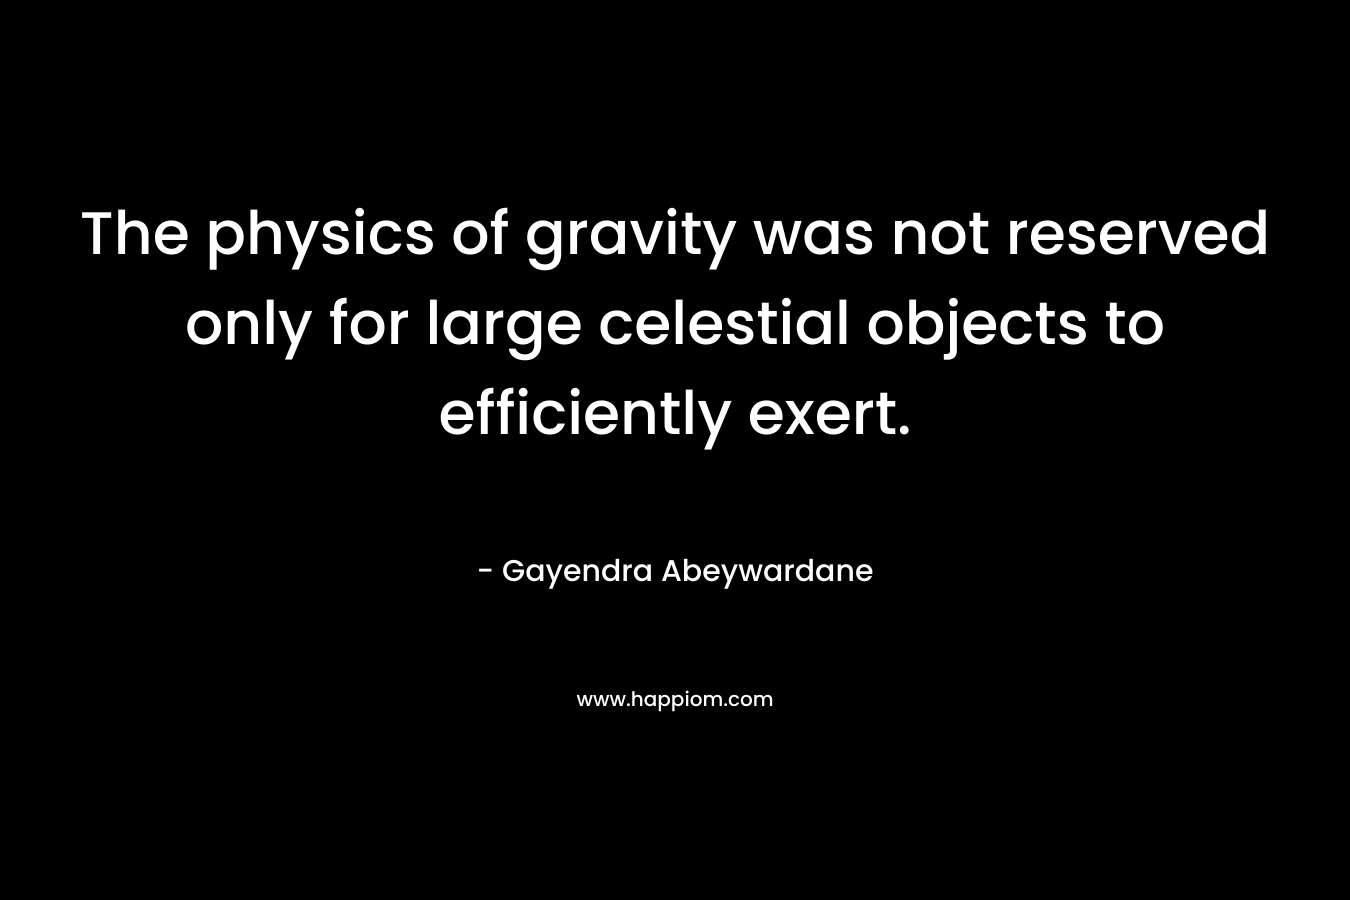 The physics of gravity was not reserved only for large celestial objects to efficiently exert. – Gayendra Abeywardane